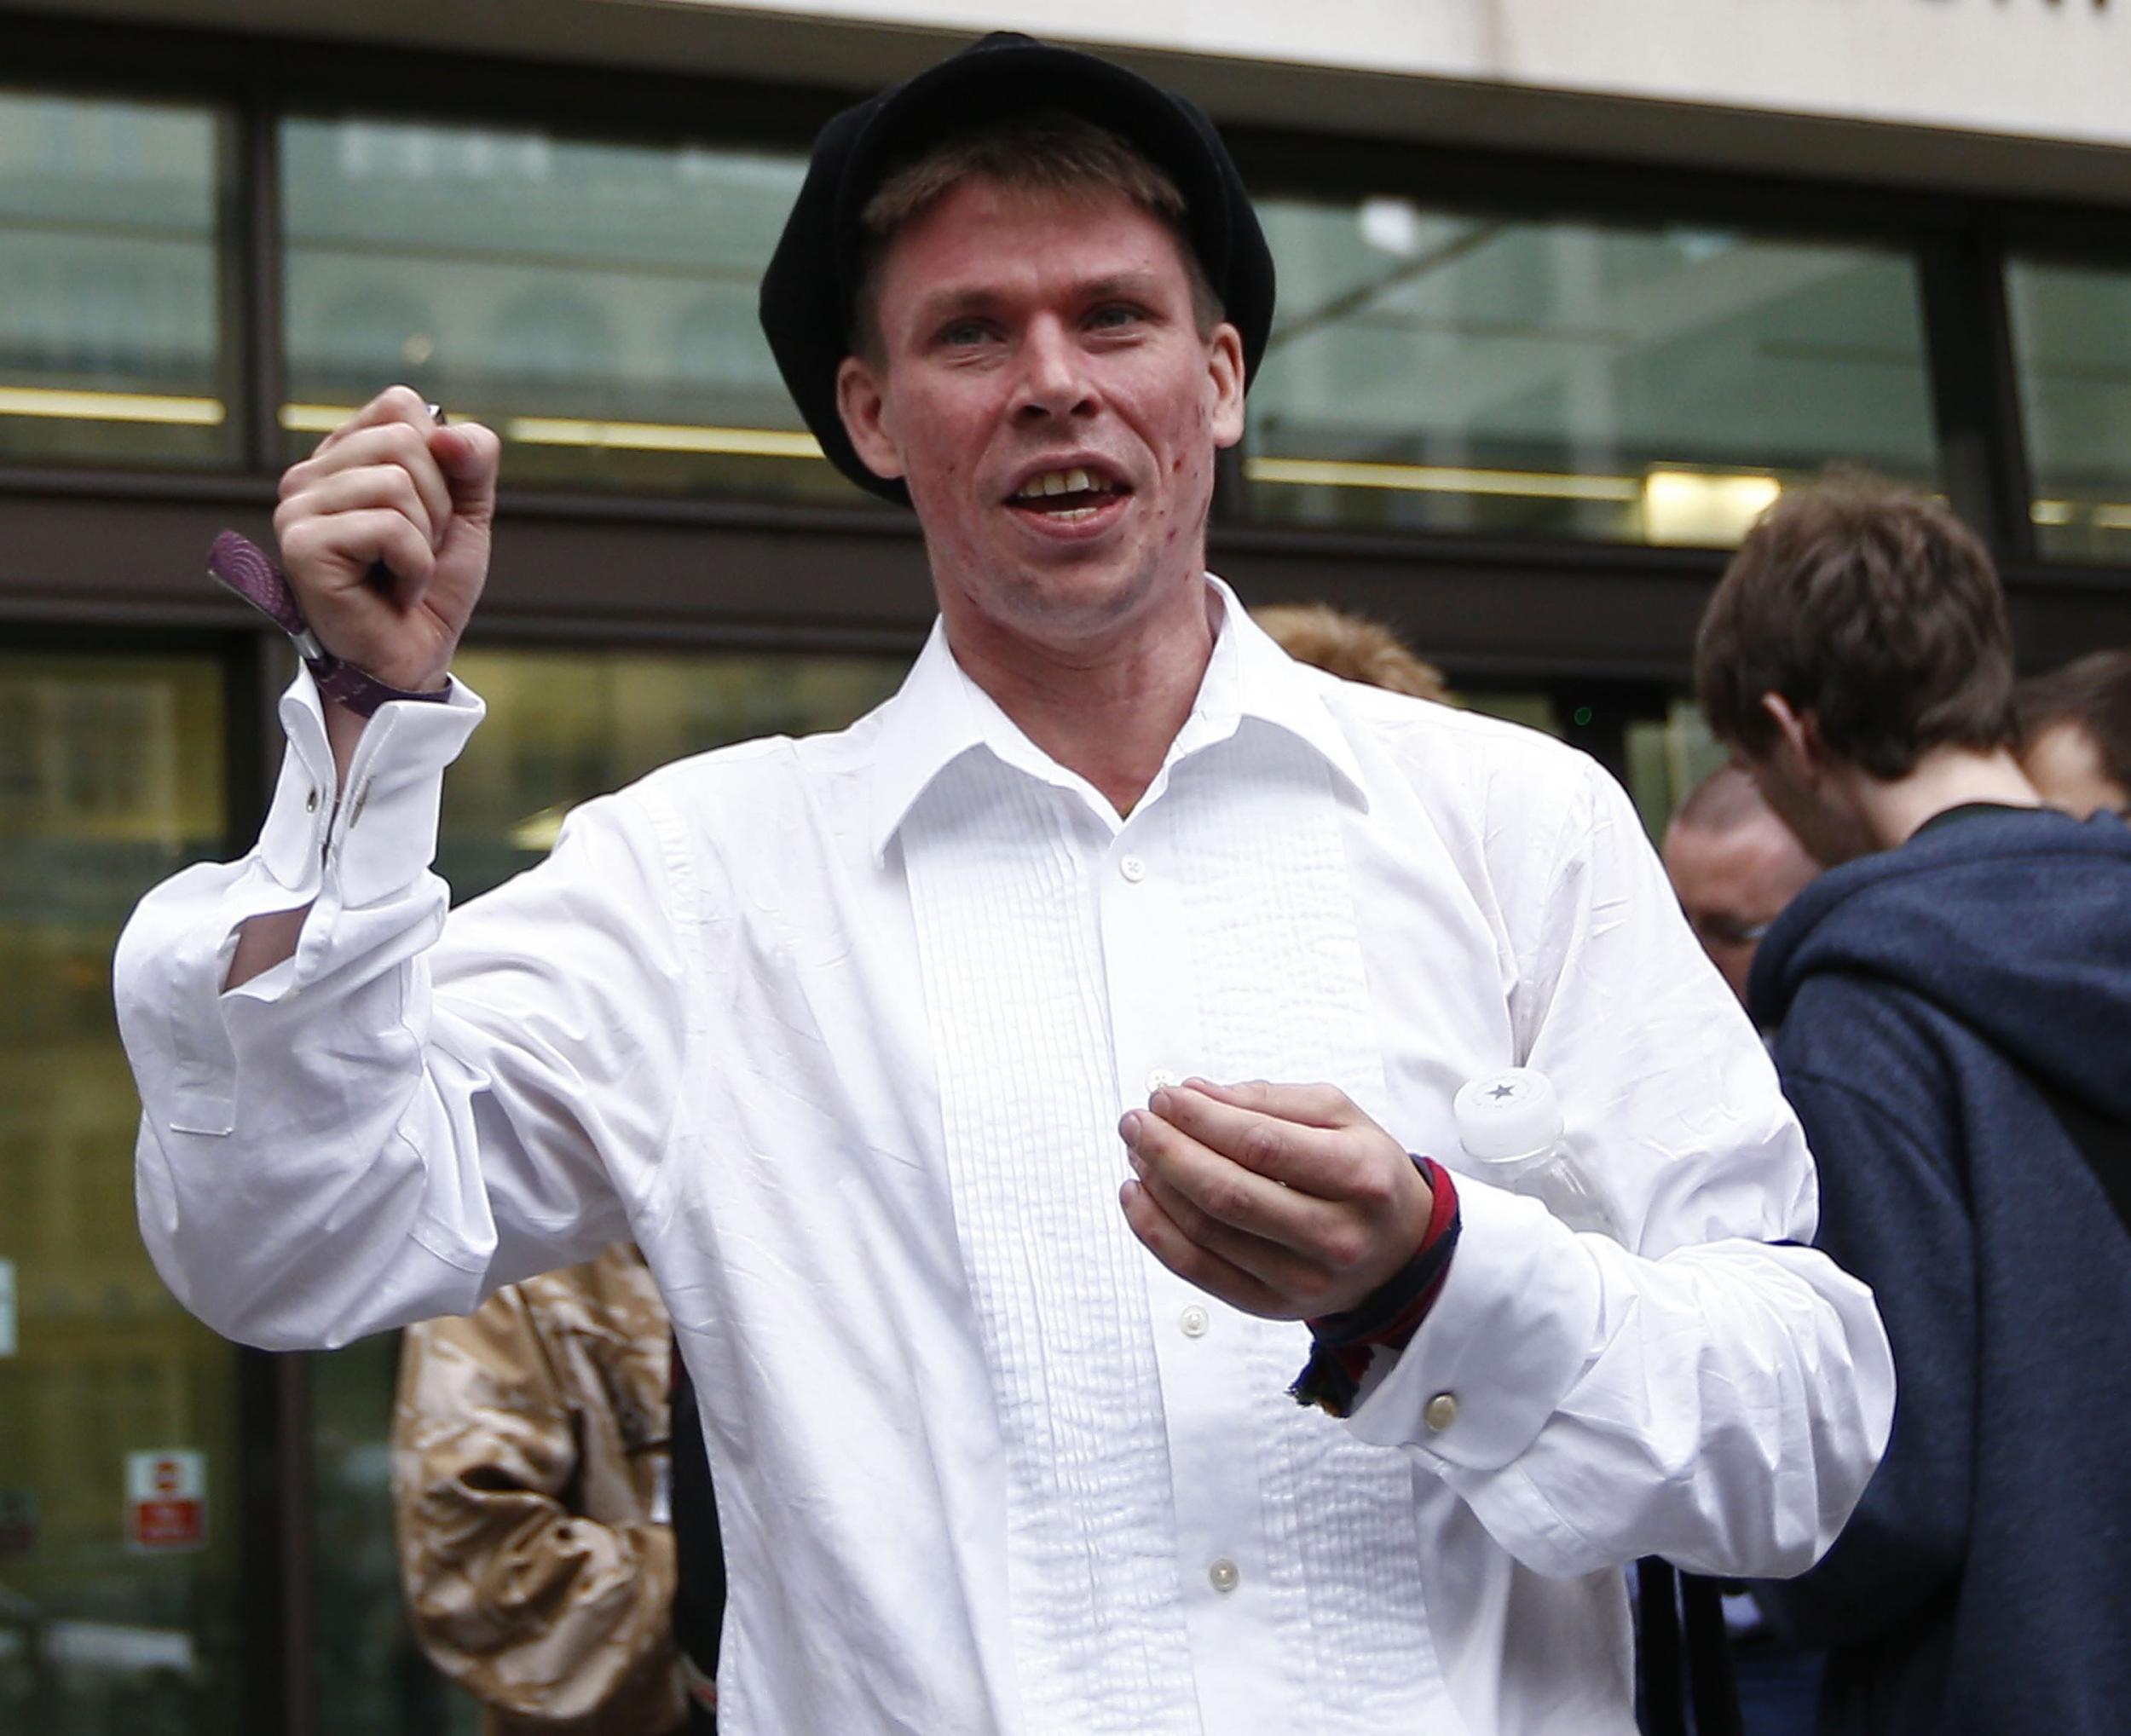 Lauri Love reacts as he leaves after attending his extradition hearing at Westminster Magistrates' Court in London, 16 September 16, 2016.